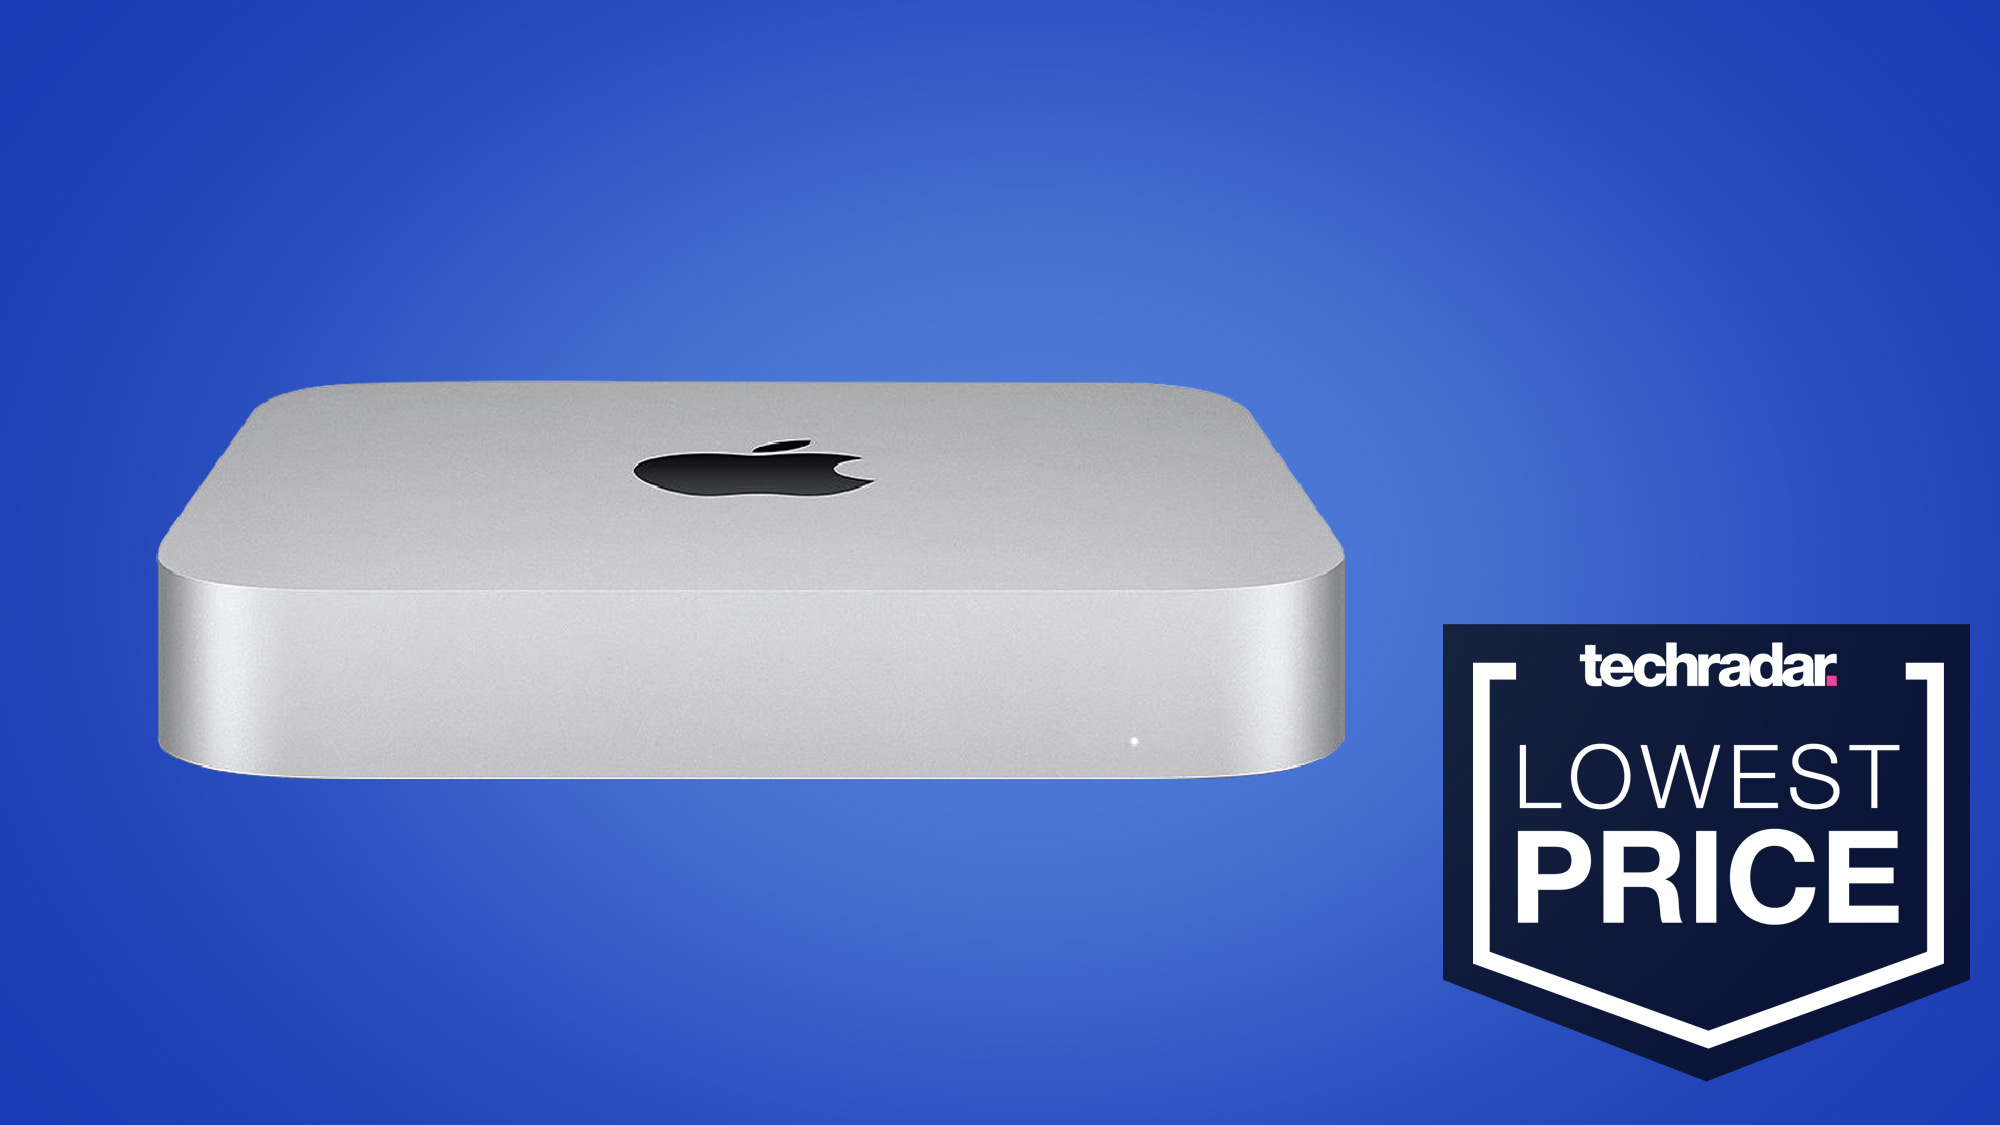 The 2020 Apple Mac Mini gets $120 slashed off price in epic deal 